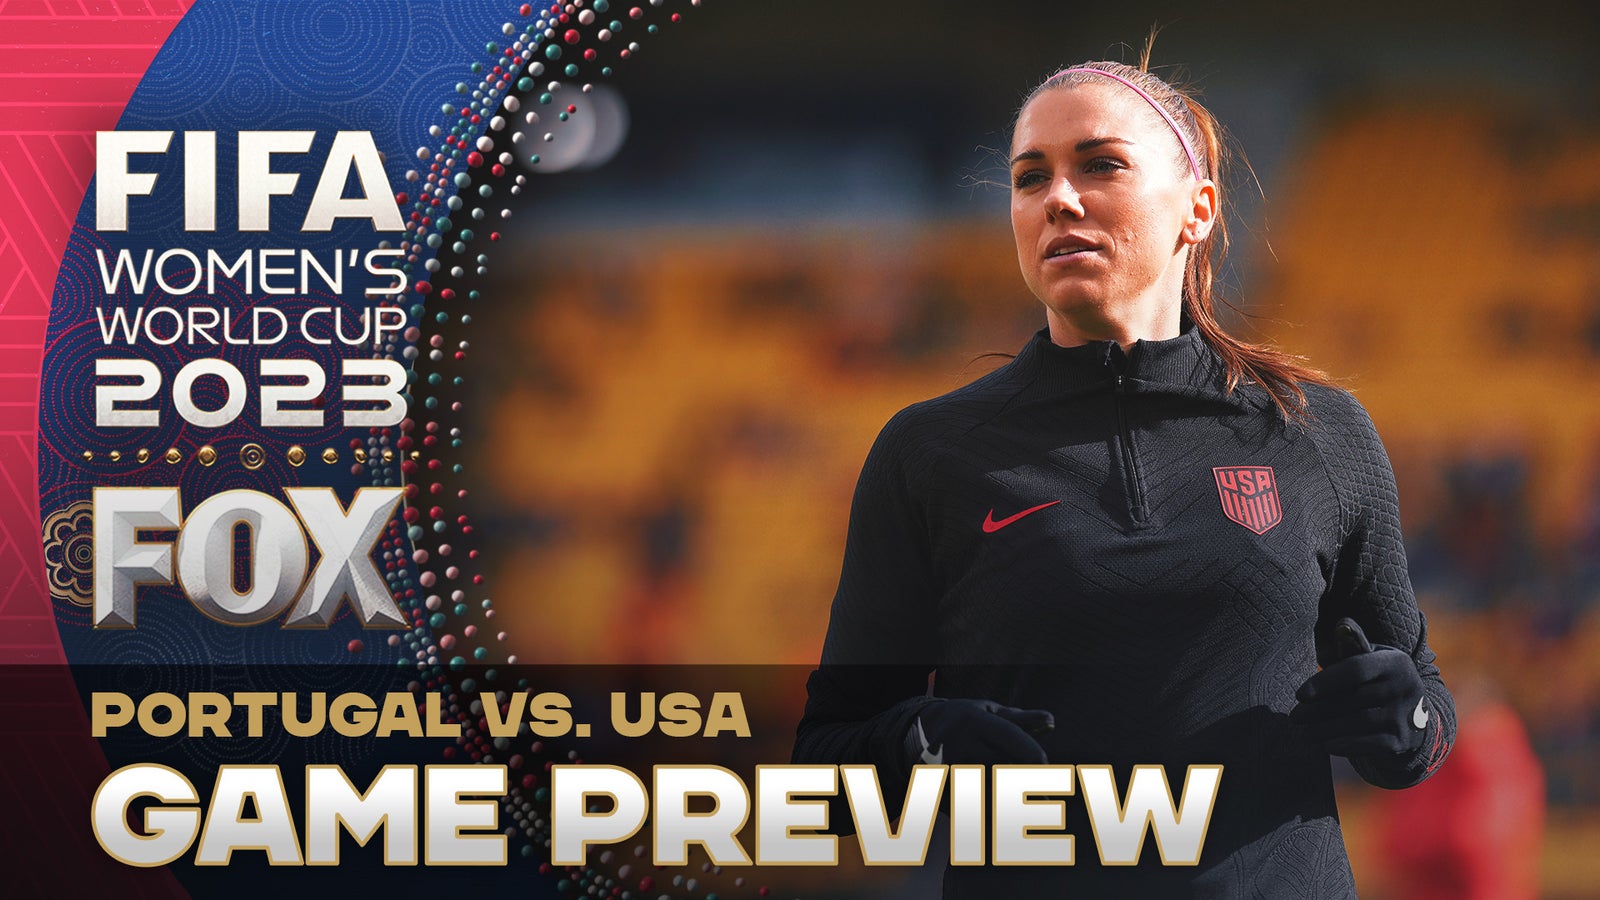 "This is a must win" - Carli Lloyd and Alexi Lalas discuss adjustments the USWNT needs to make